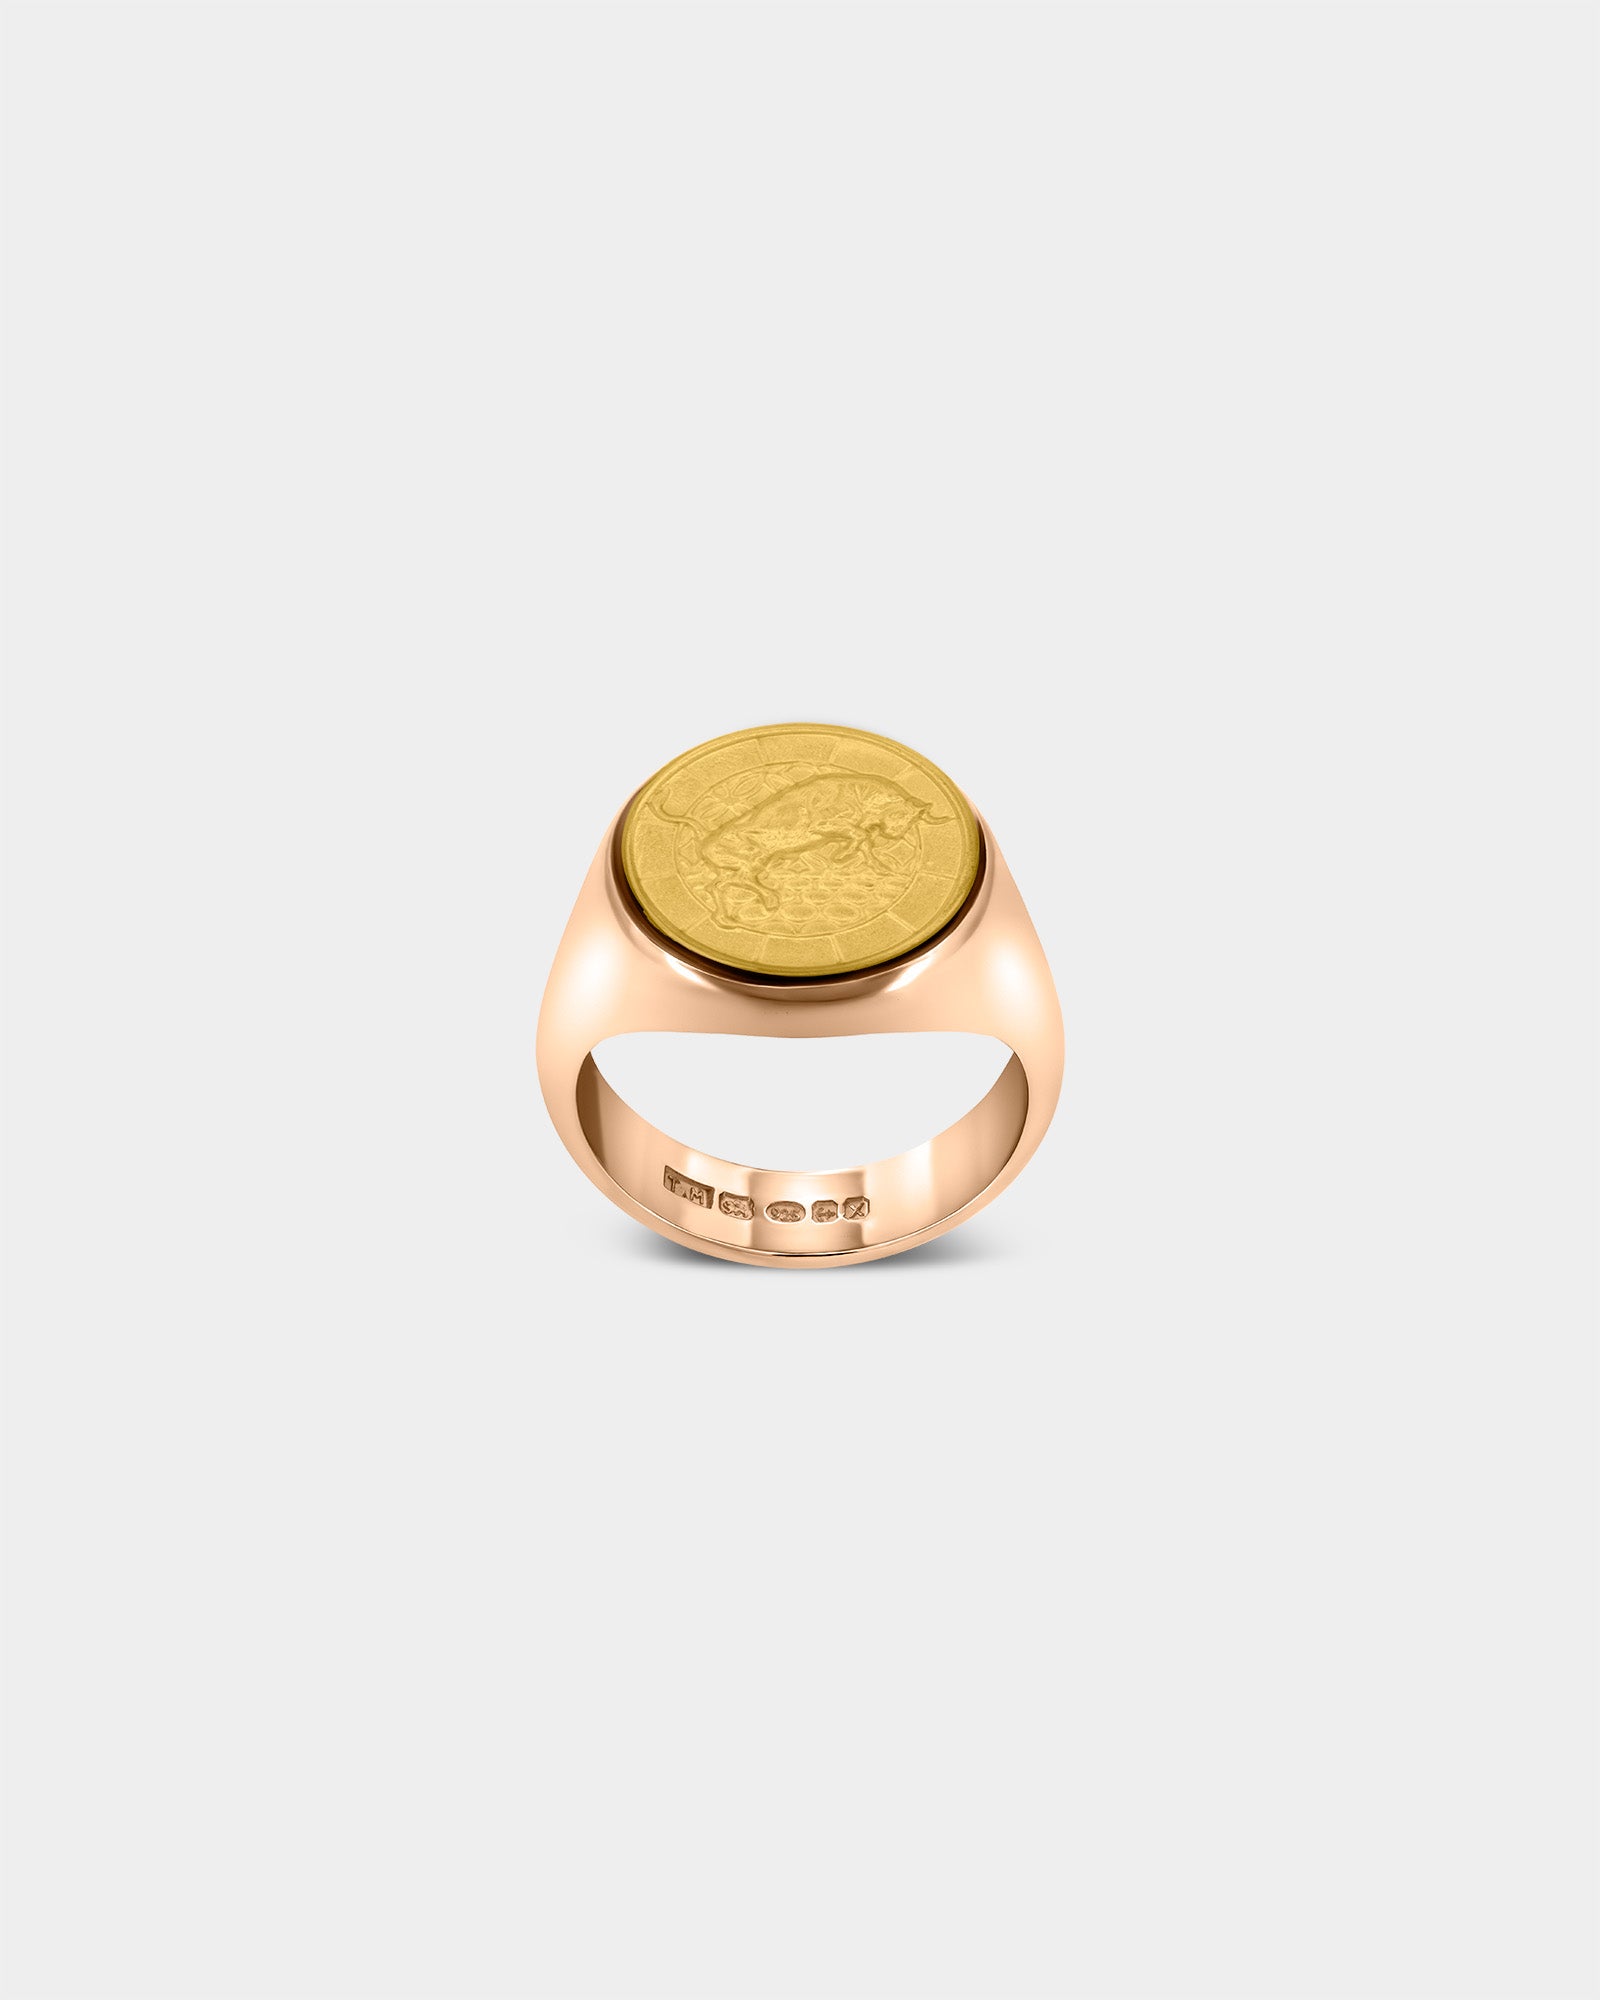 The Bull Large Signet Ring in 9k Rose Gold / 9k Yellow Gold by Wilson Grant